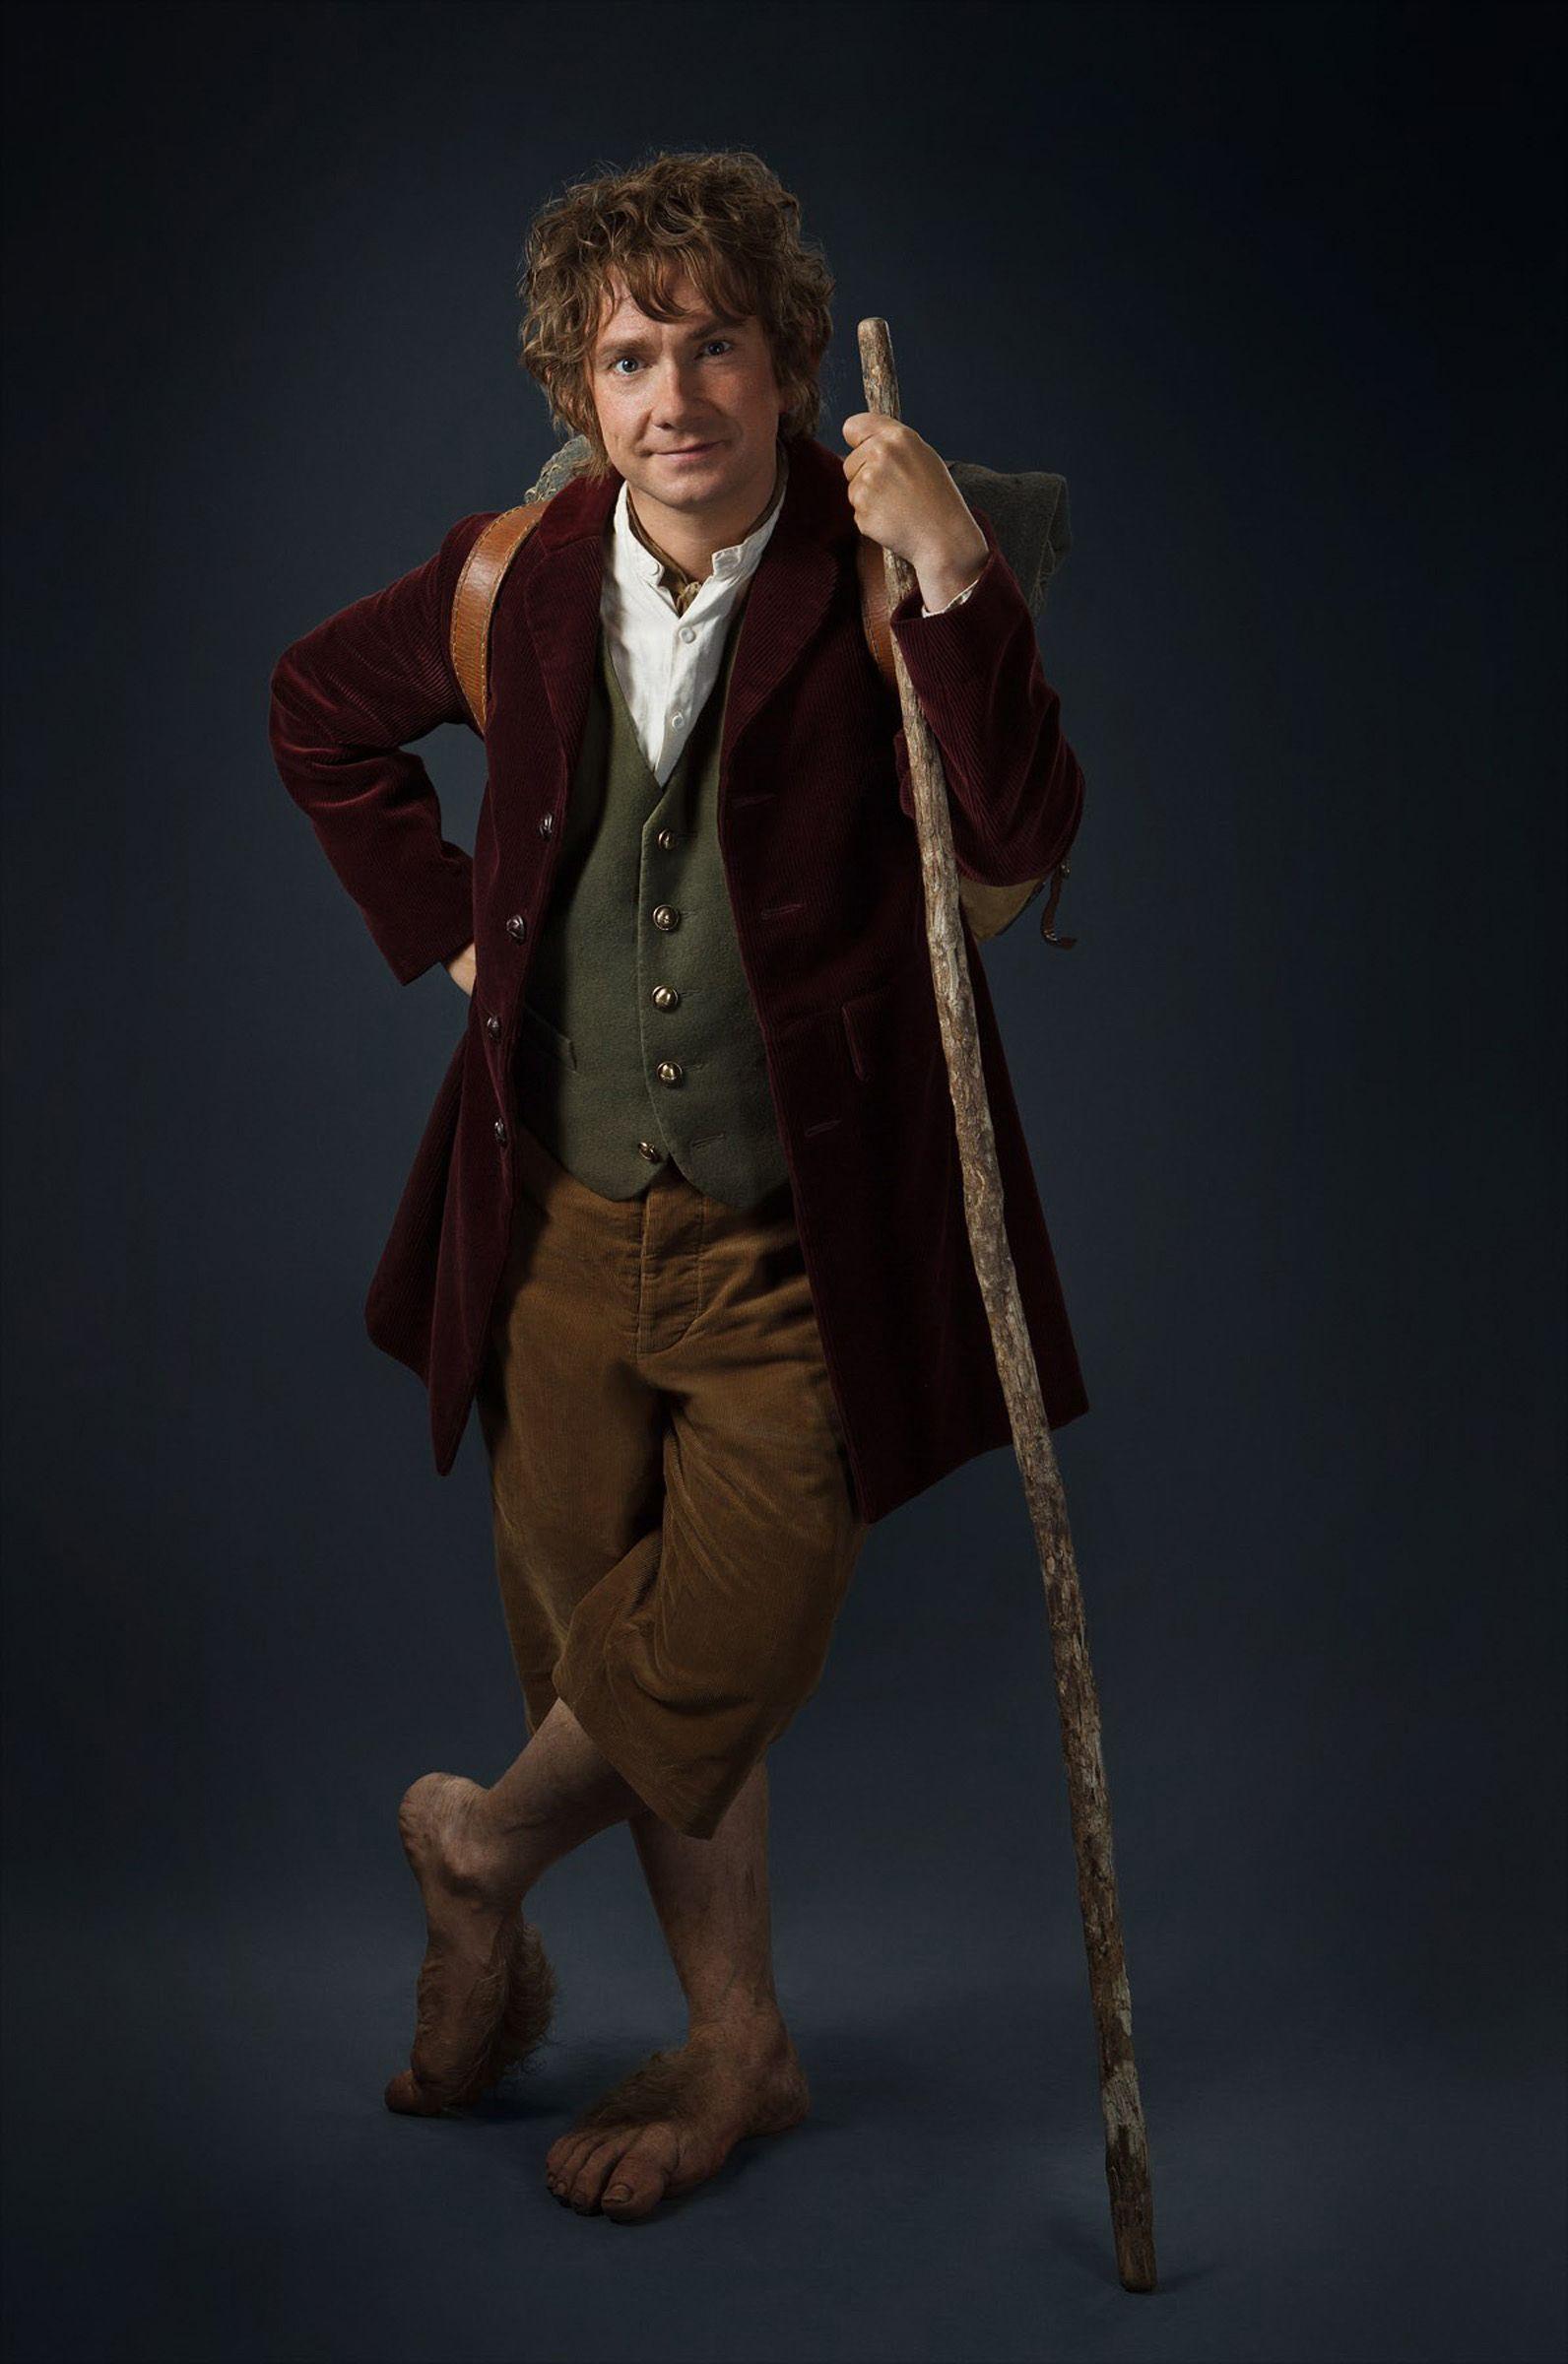 Bilbo Baggins. The One Wiki to Rule Them All